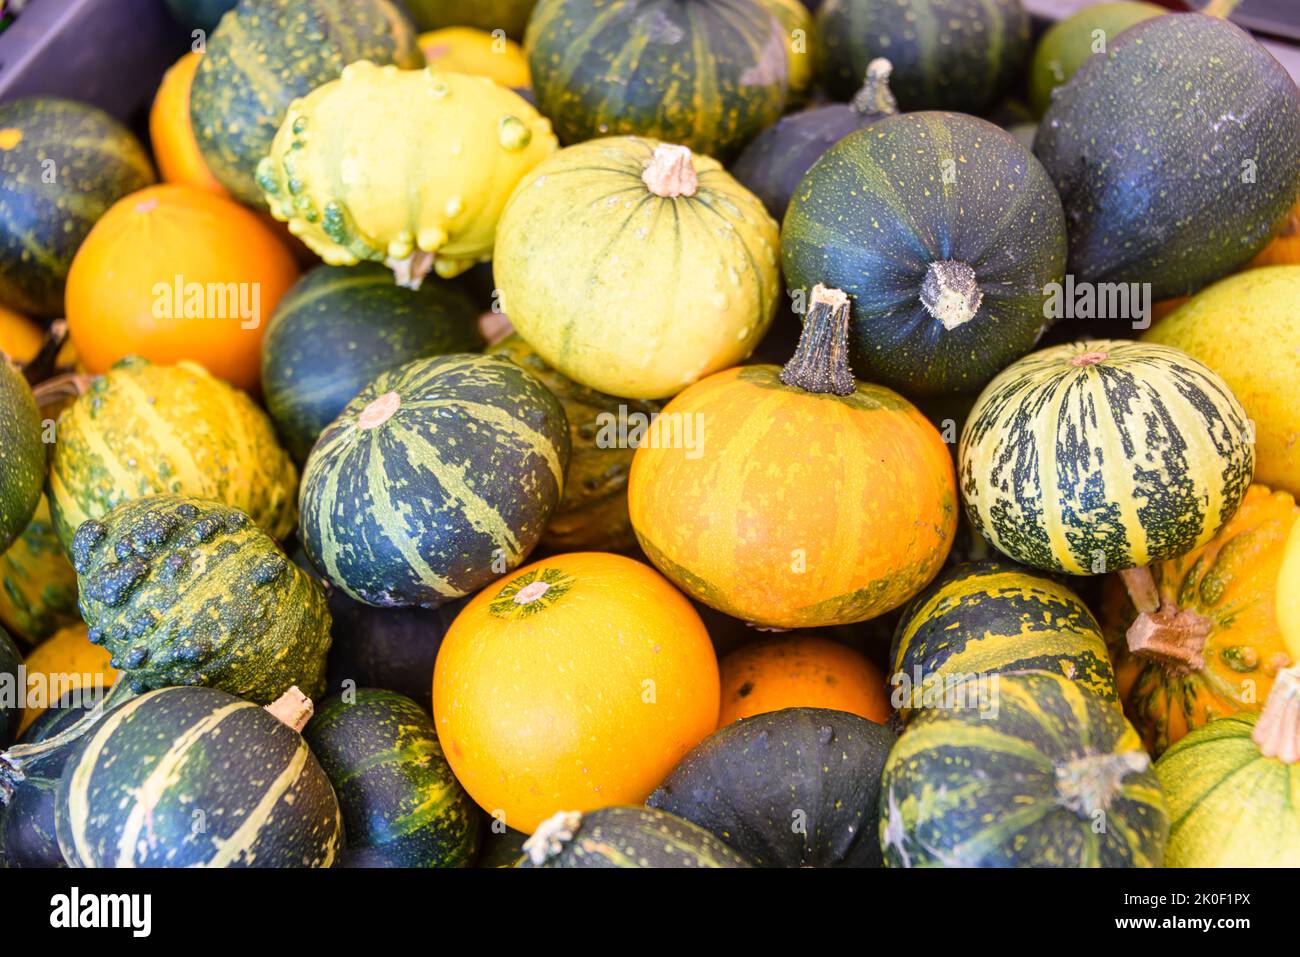 Orange, green and yellow squash fruits on sale in a grocery shop. Stock Photo